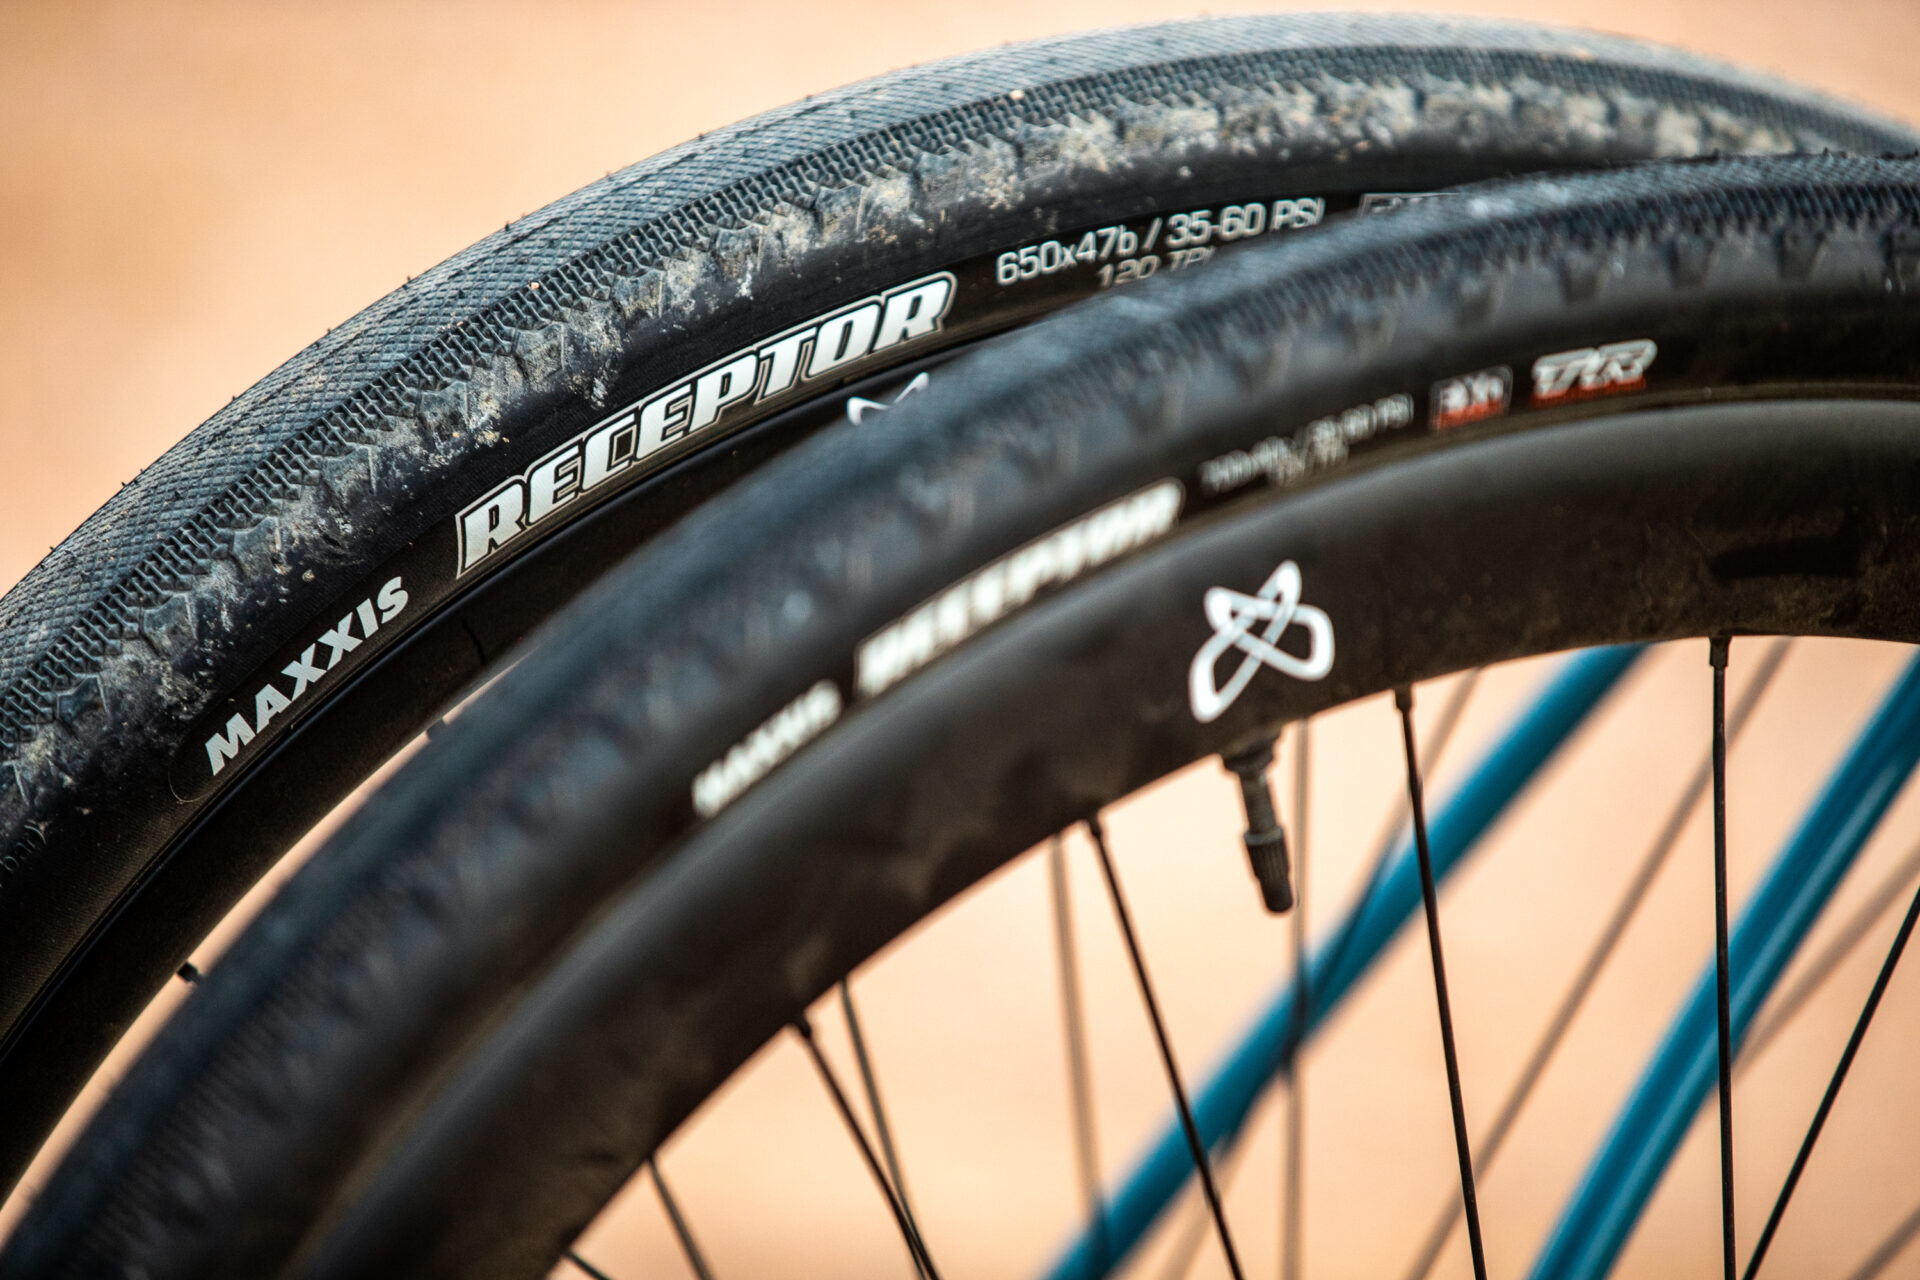 Maxxis Receptor bicycle tires.